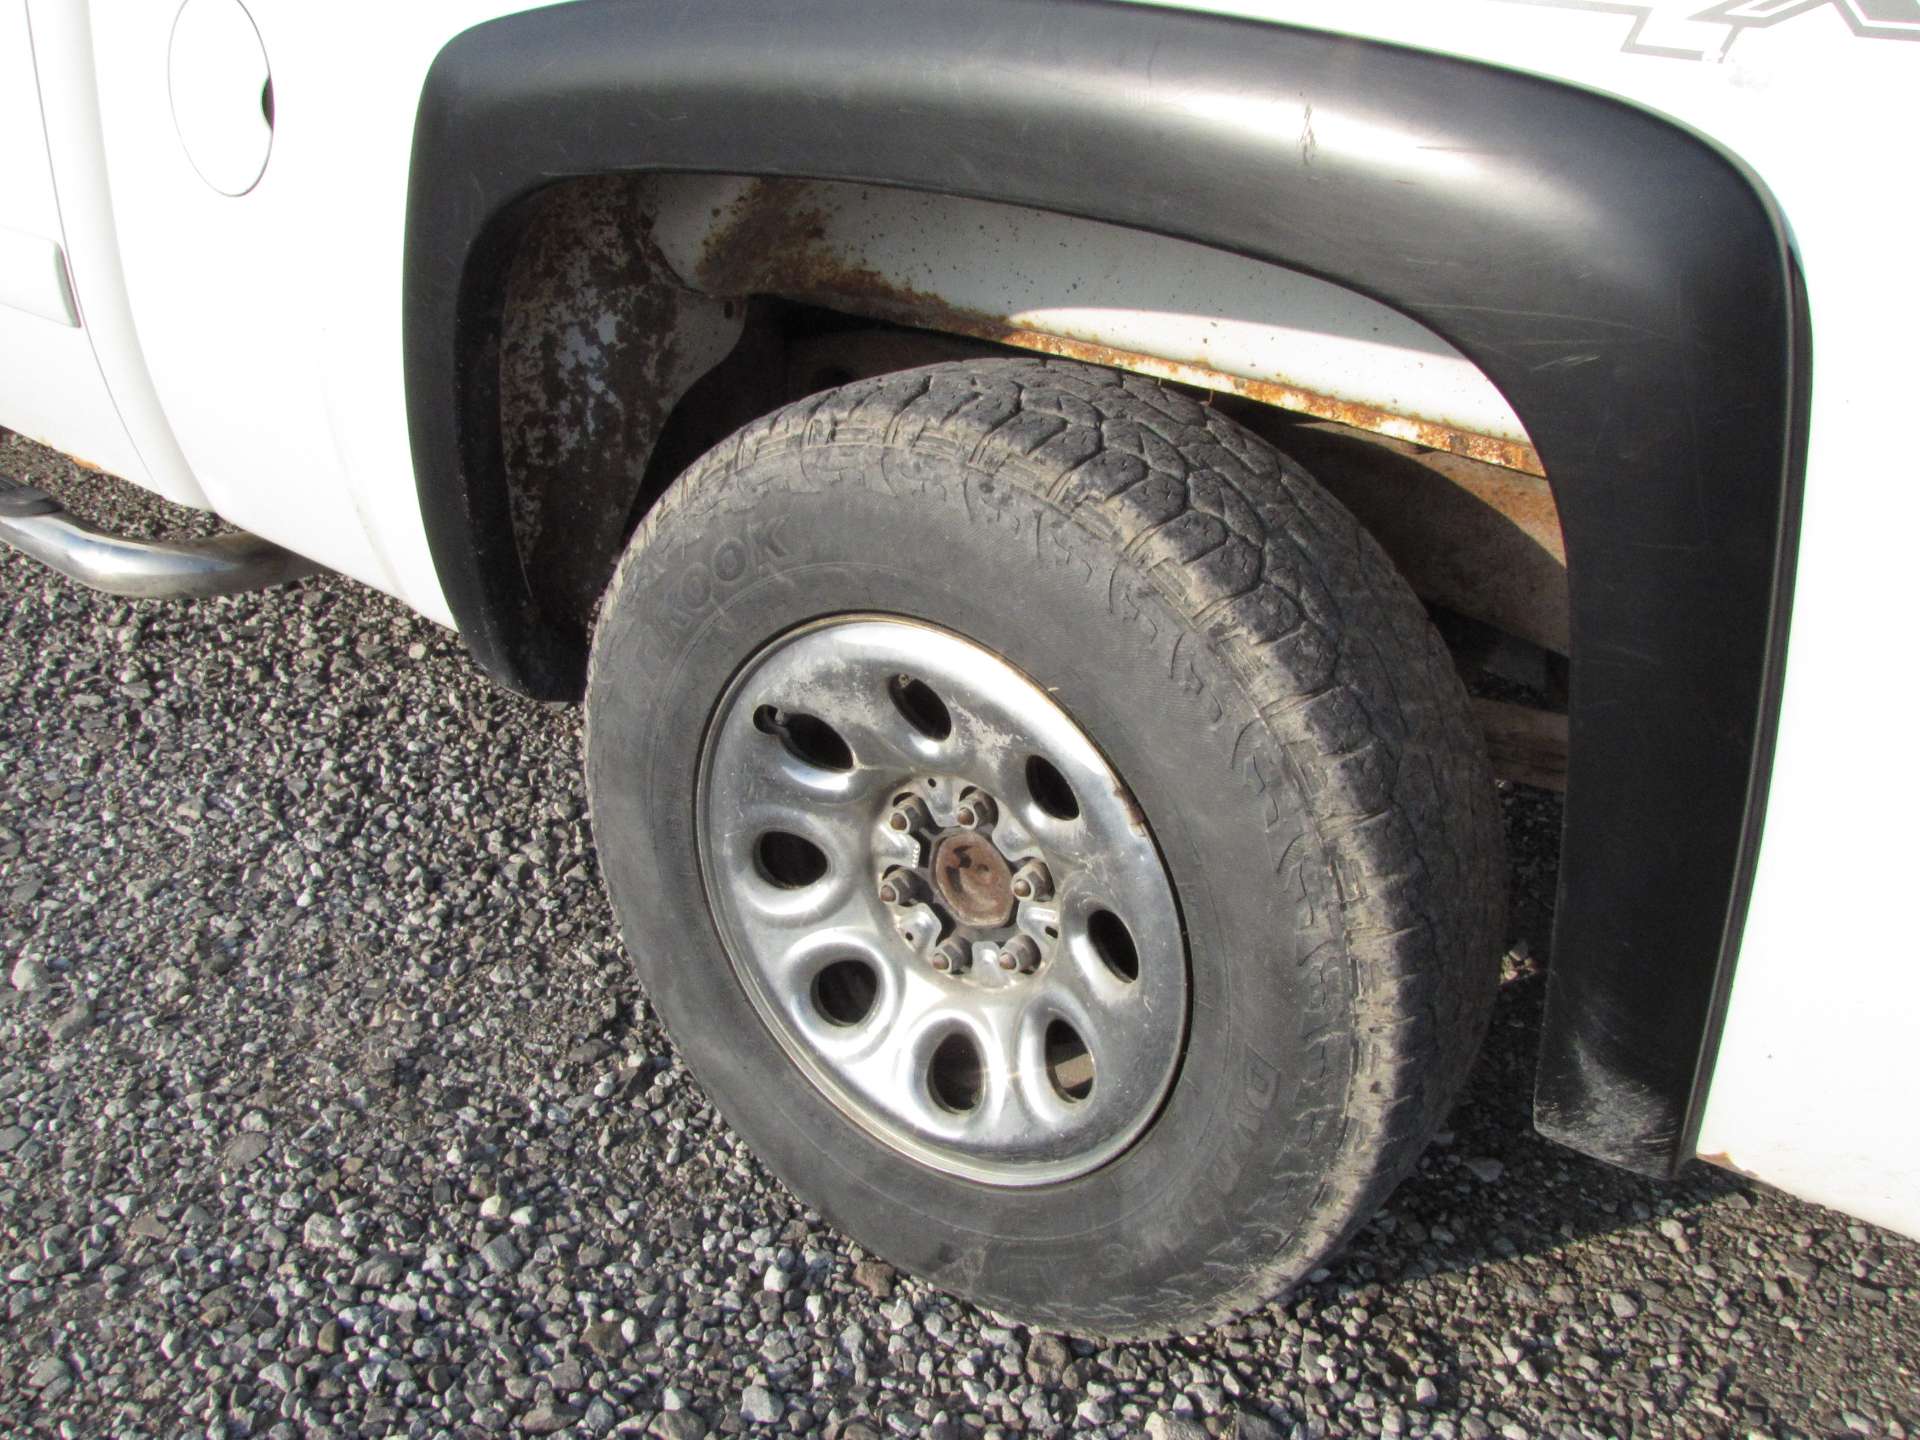 2008 Chevy Silverado 1500 LT Pickup Truck (CRACKED FRAME) - Image 20 of 43